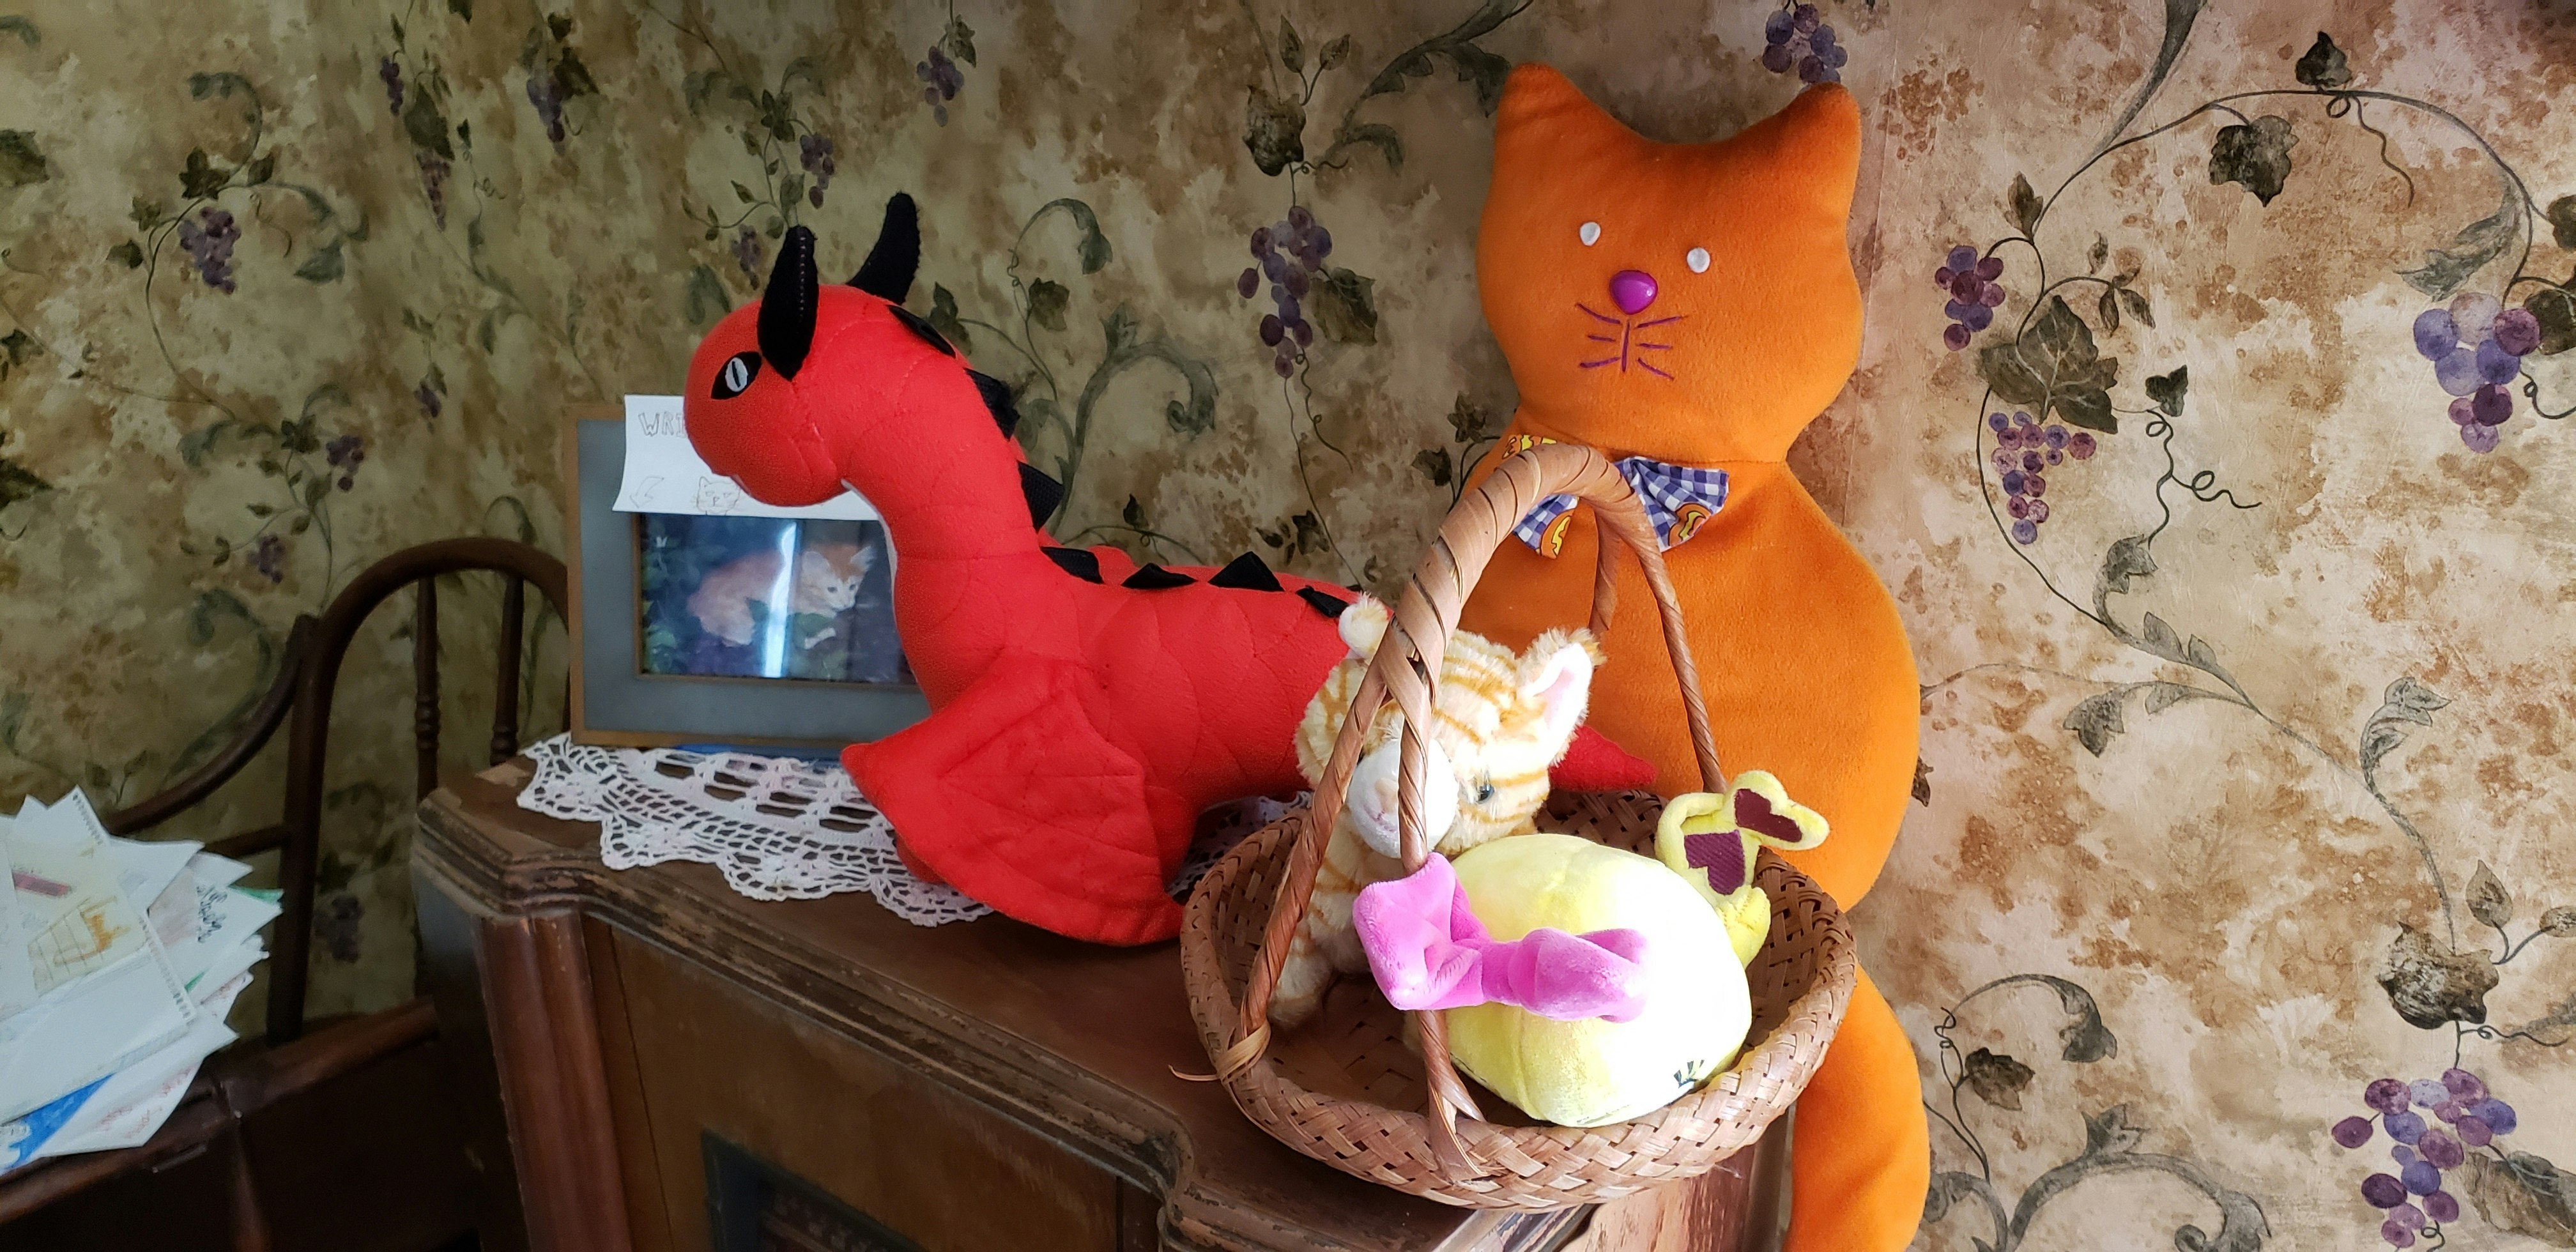 A stuffed orange cat and other animals left for the ghost of Emily in a room near the one where the girl died of cholera in the early 1900s.